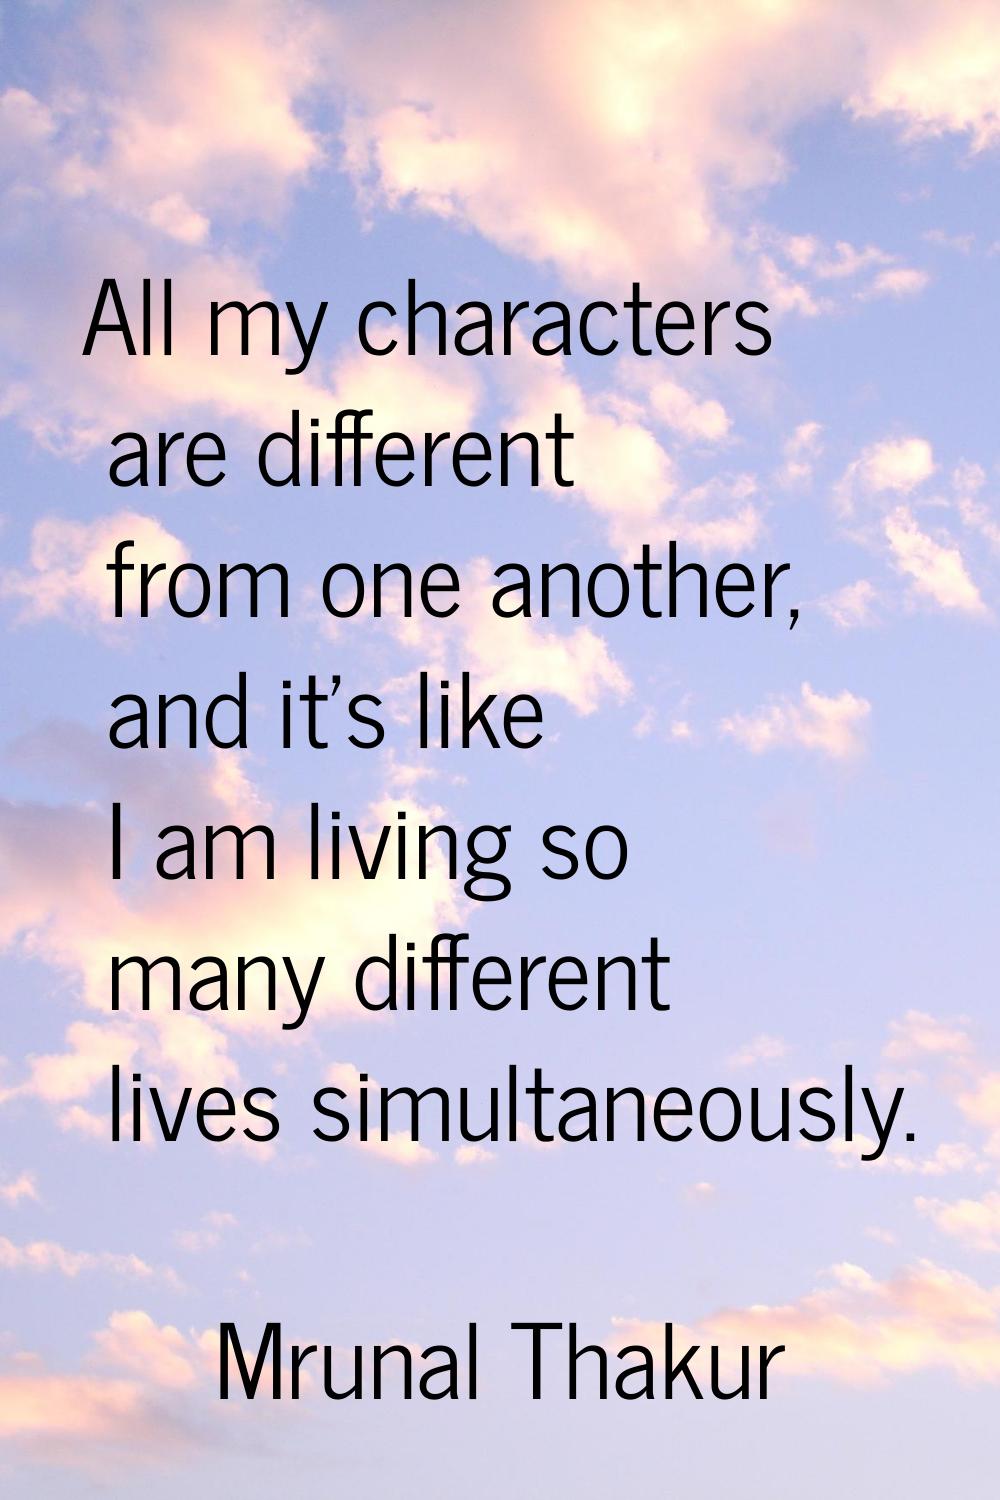 All my characters are different from one another, and it's like I am living so many different lives